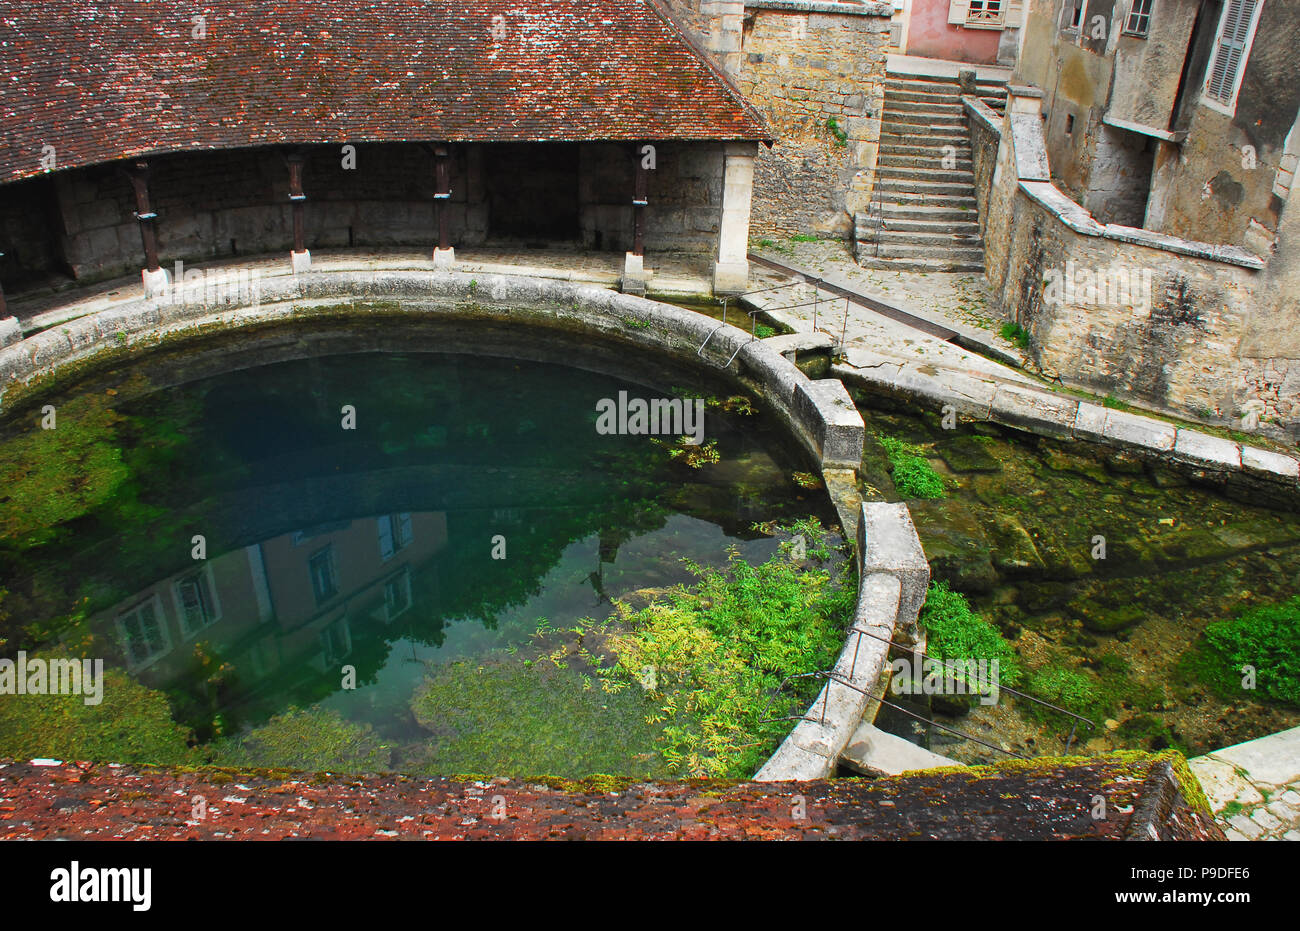 The Fosse Dionne is the source of the Vaucluse spring and is dedicated to the ancient Goddess Divona. . . which means divine.. A circular wash basin a Stock Photo